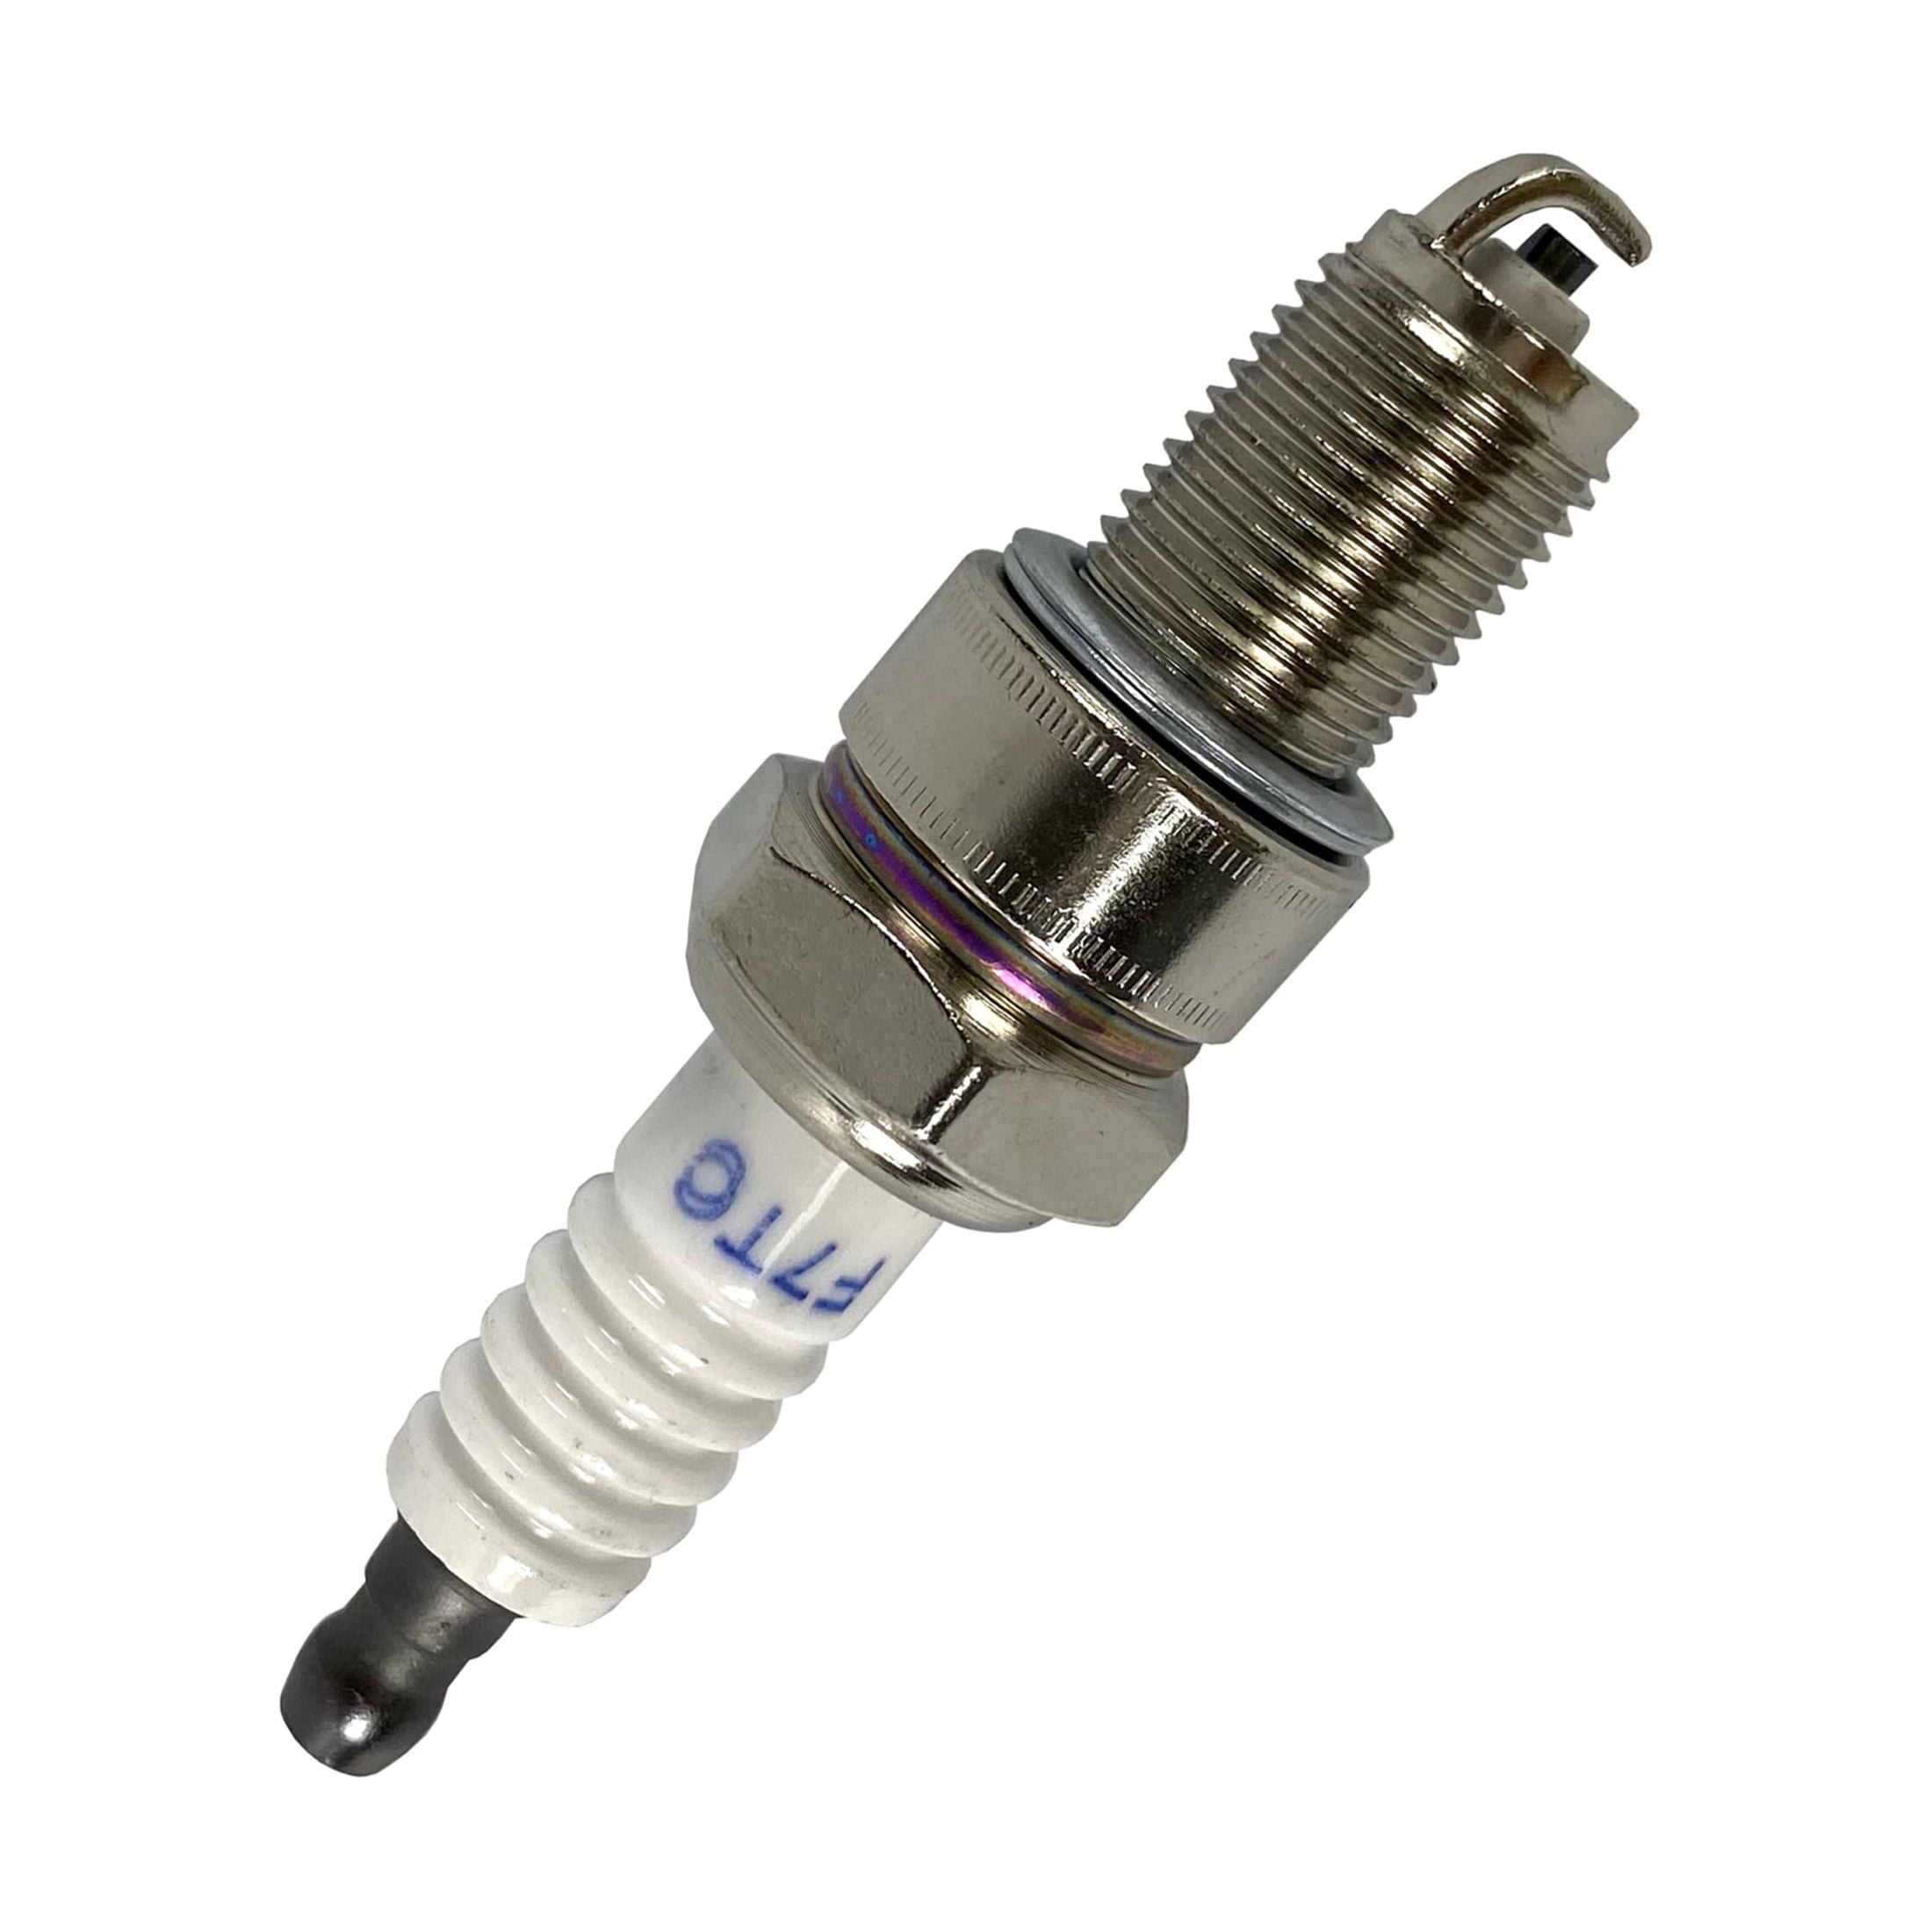 Replacement spark plug F7TC for gasoline machinery generator water